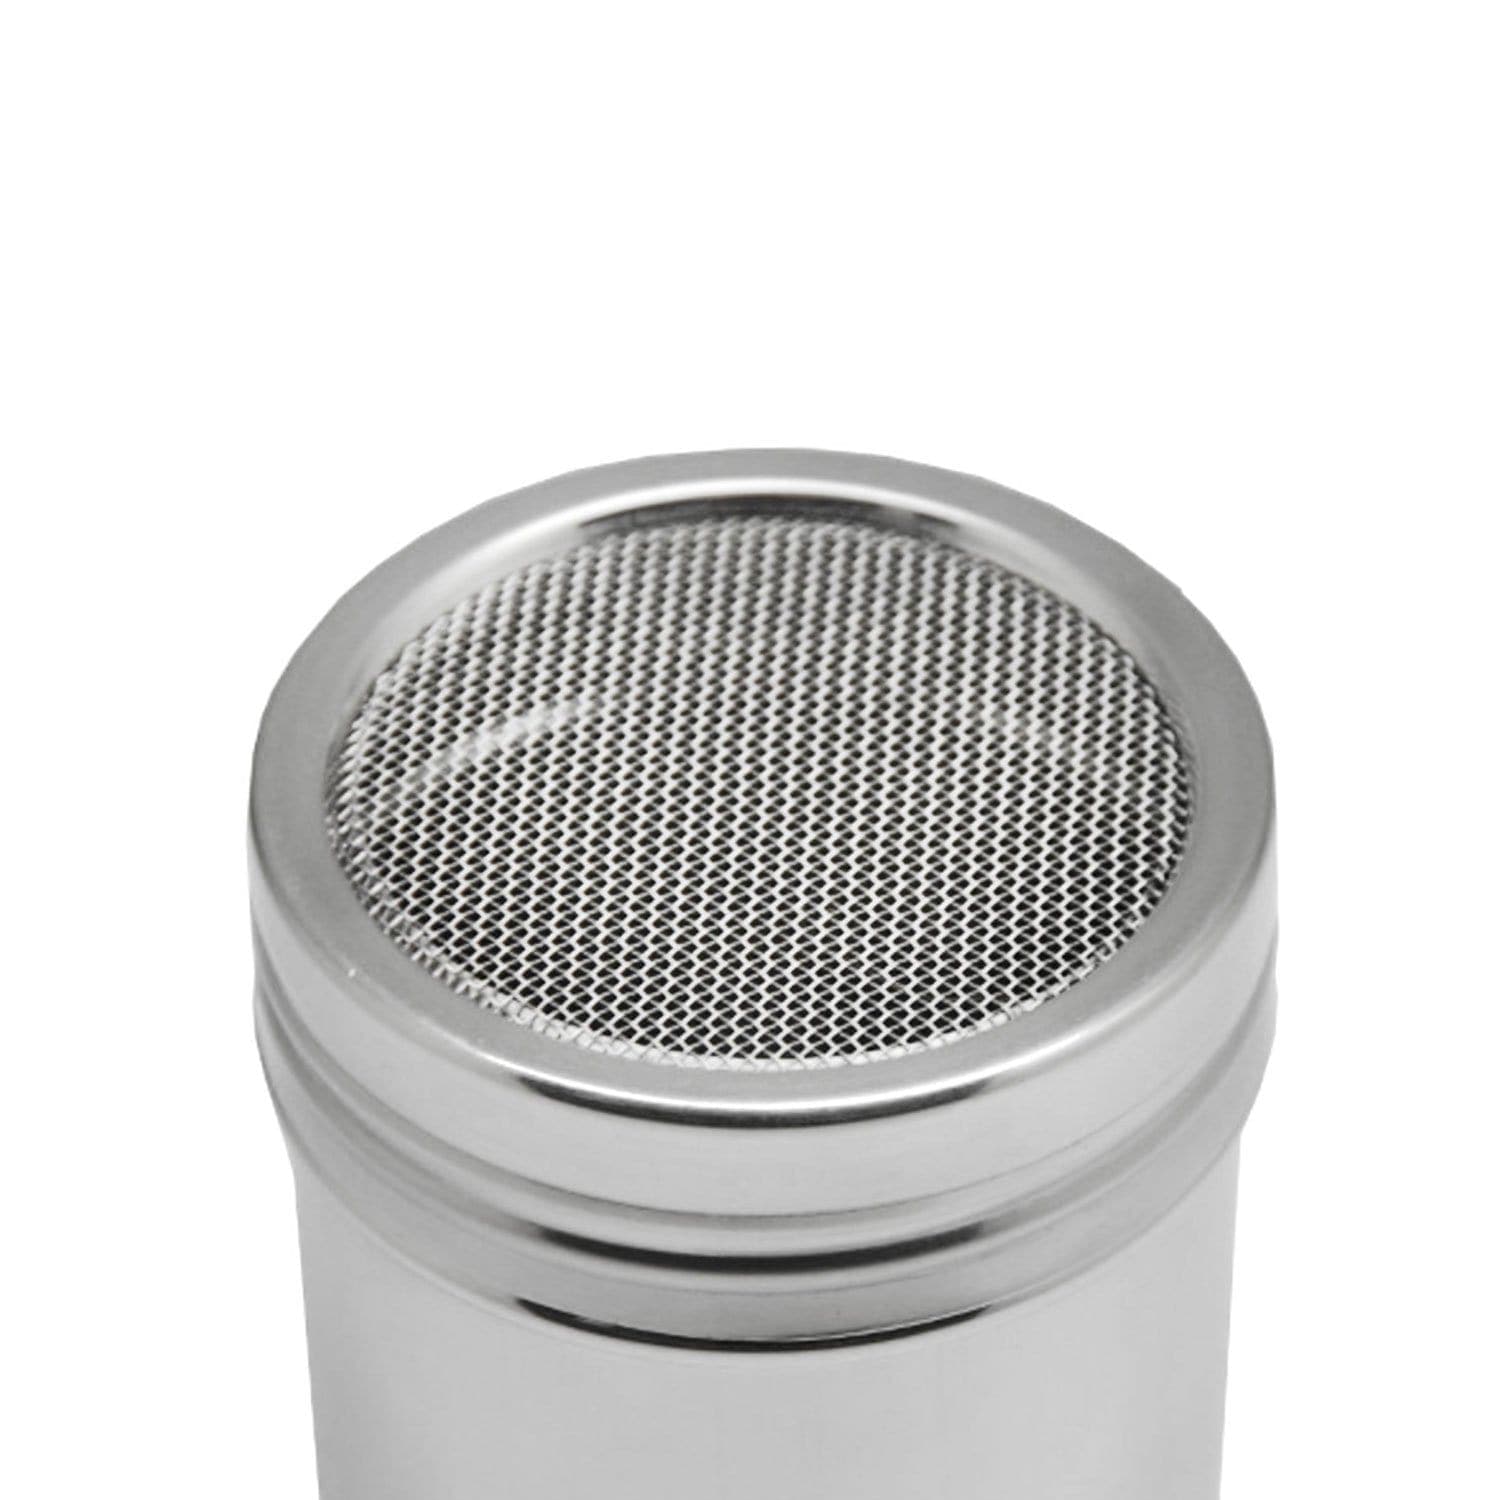 BREWING KROME COFFEE COCOA SHAKER FINE STAINLESS STEEL - C2289